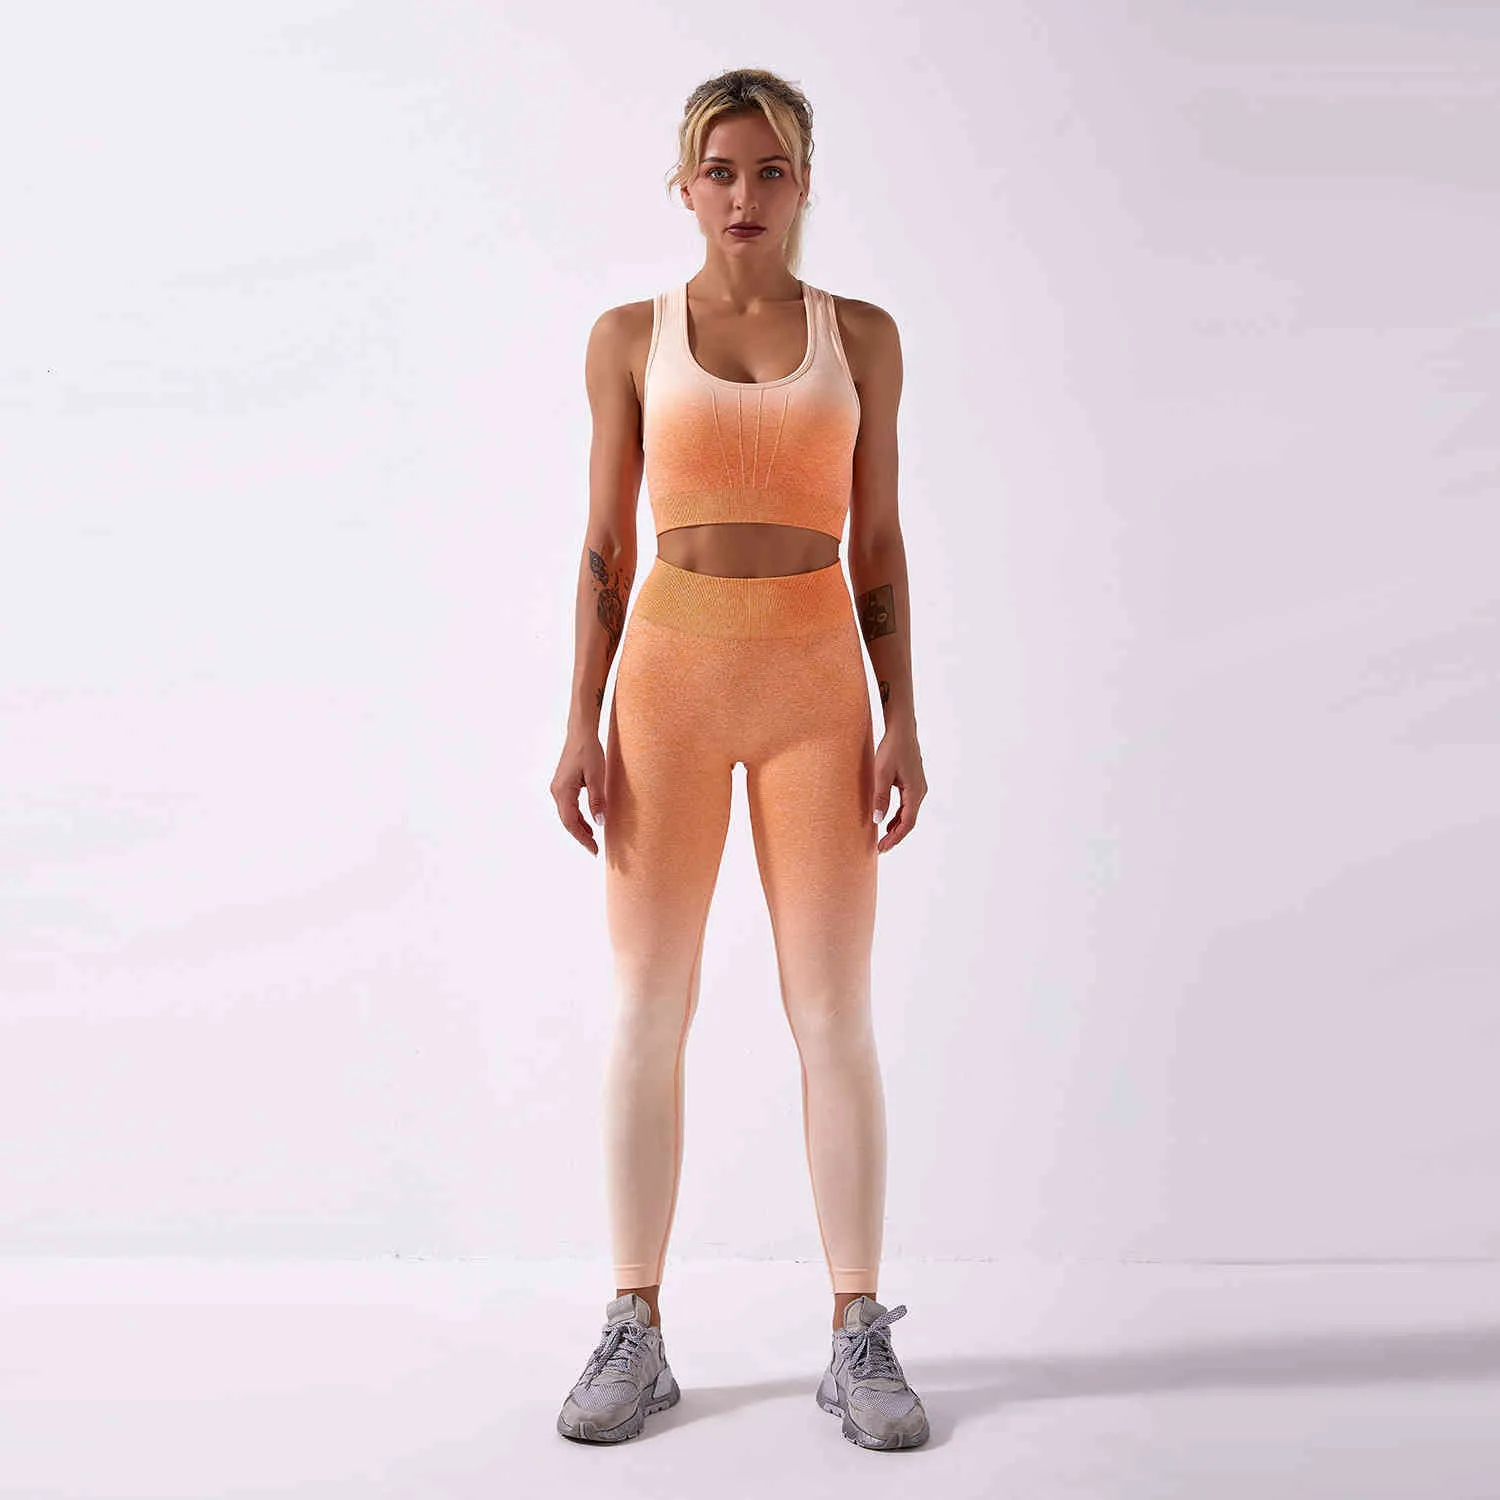 Womens Seamless Gradient Yoga Suit Knitted Aybl Sports Bra And Tie Dye  Pants For Fitness, Autumn Winter Workout Apparel From Boromir88, $40.81